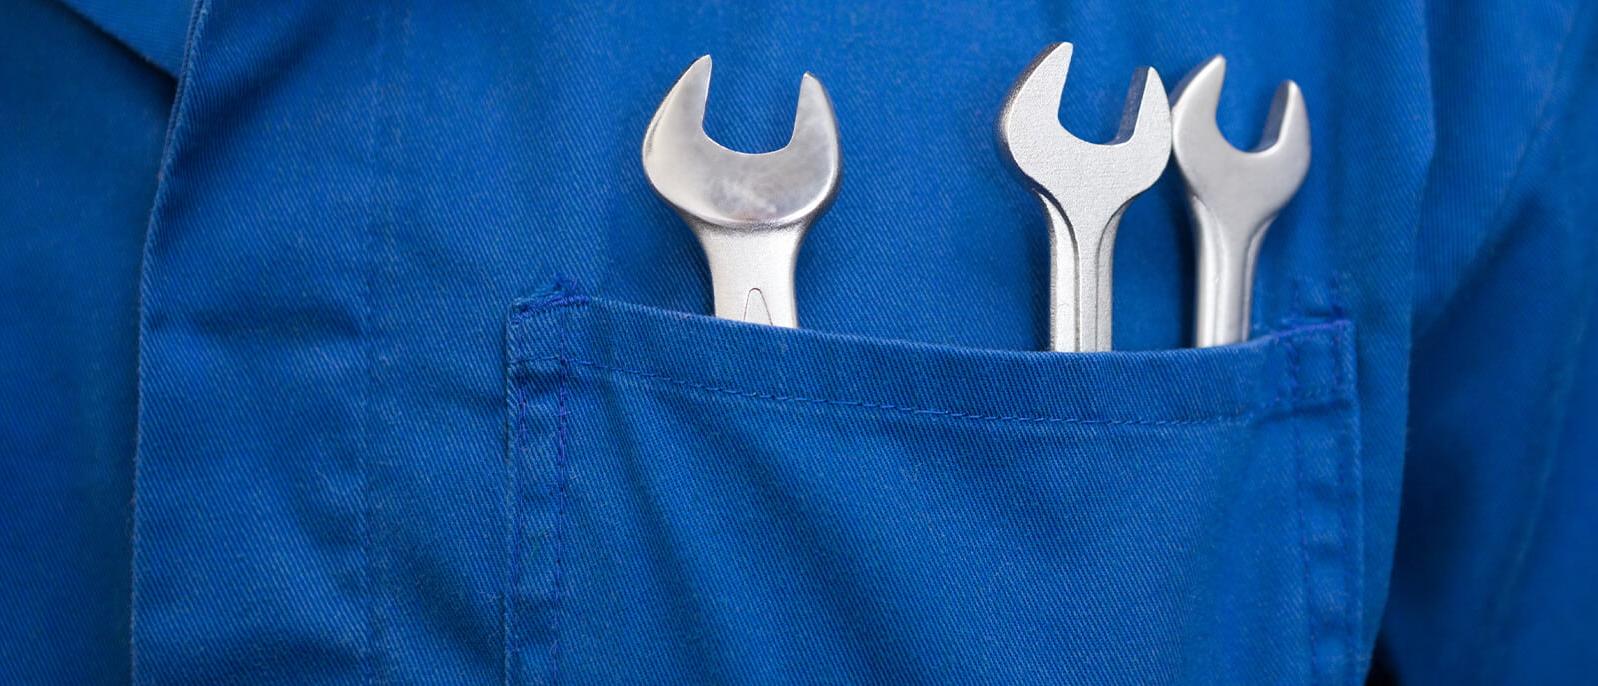 Mechanic's jumpsuit pocket with wrenches in it